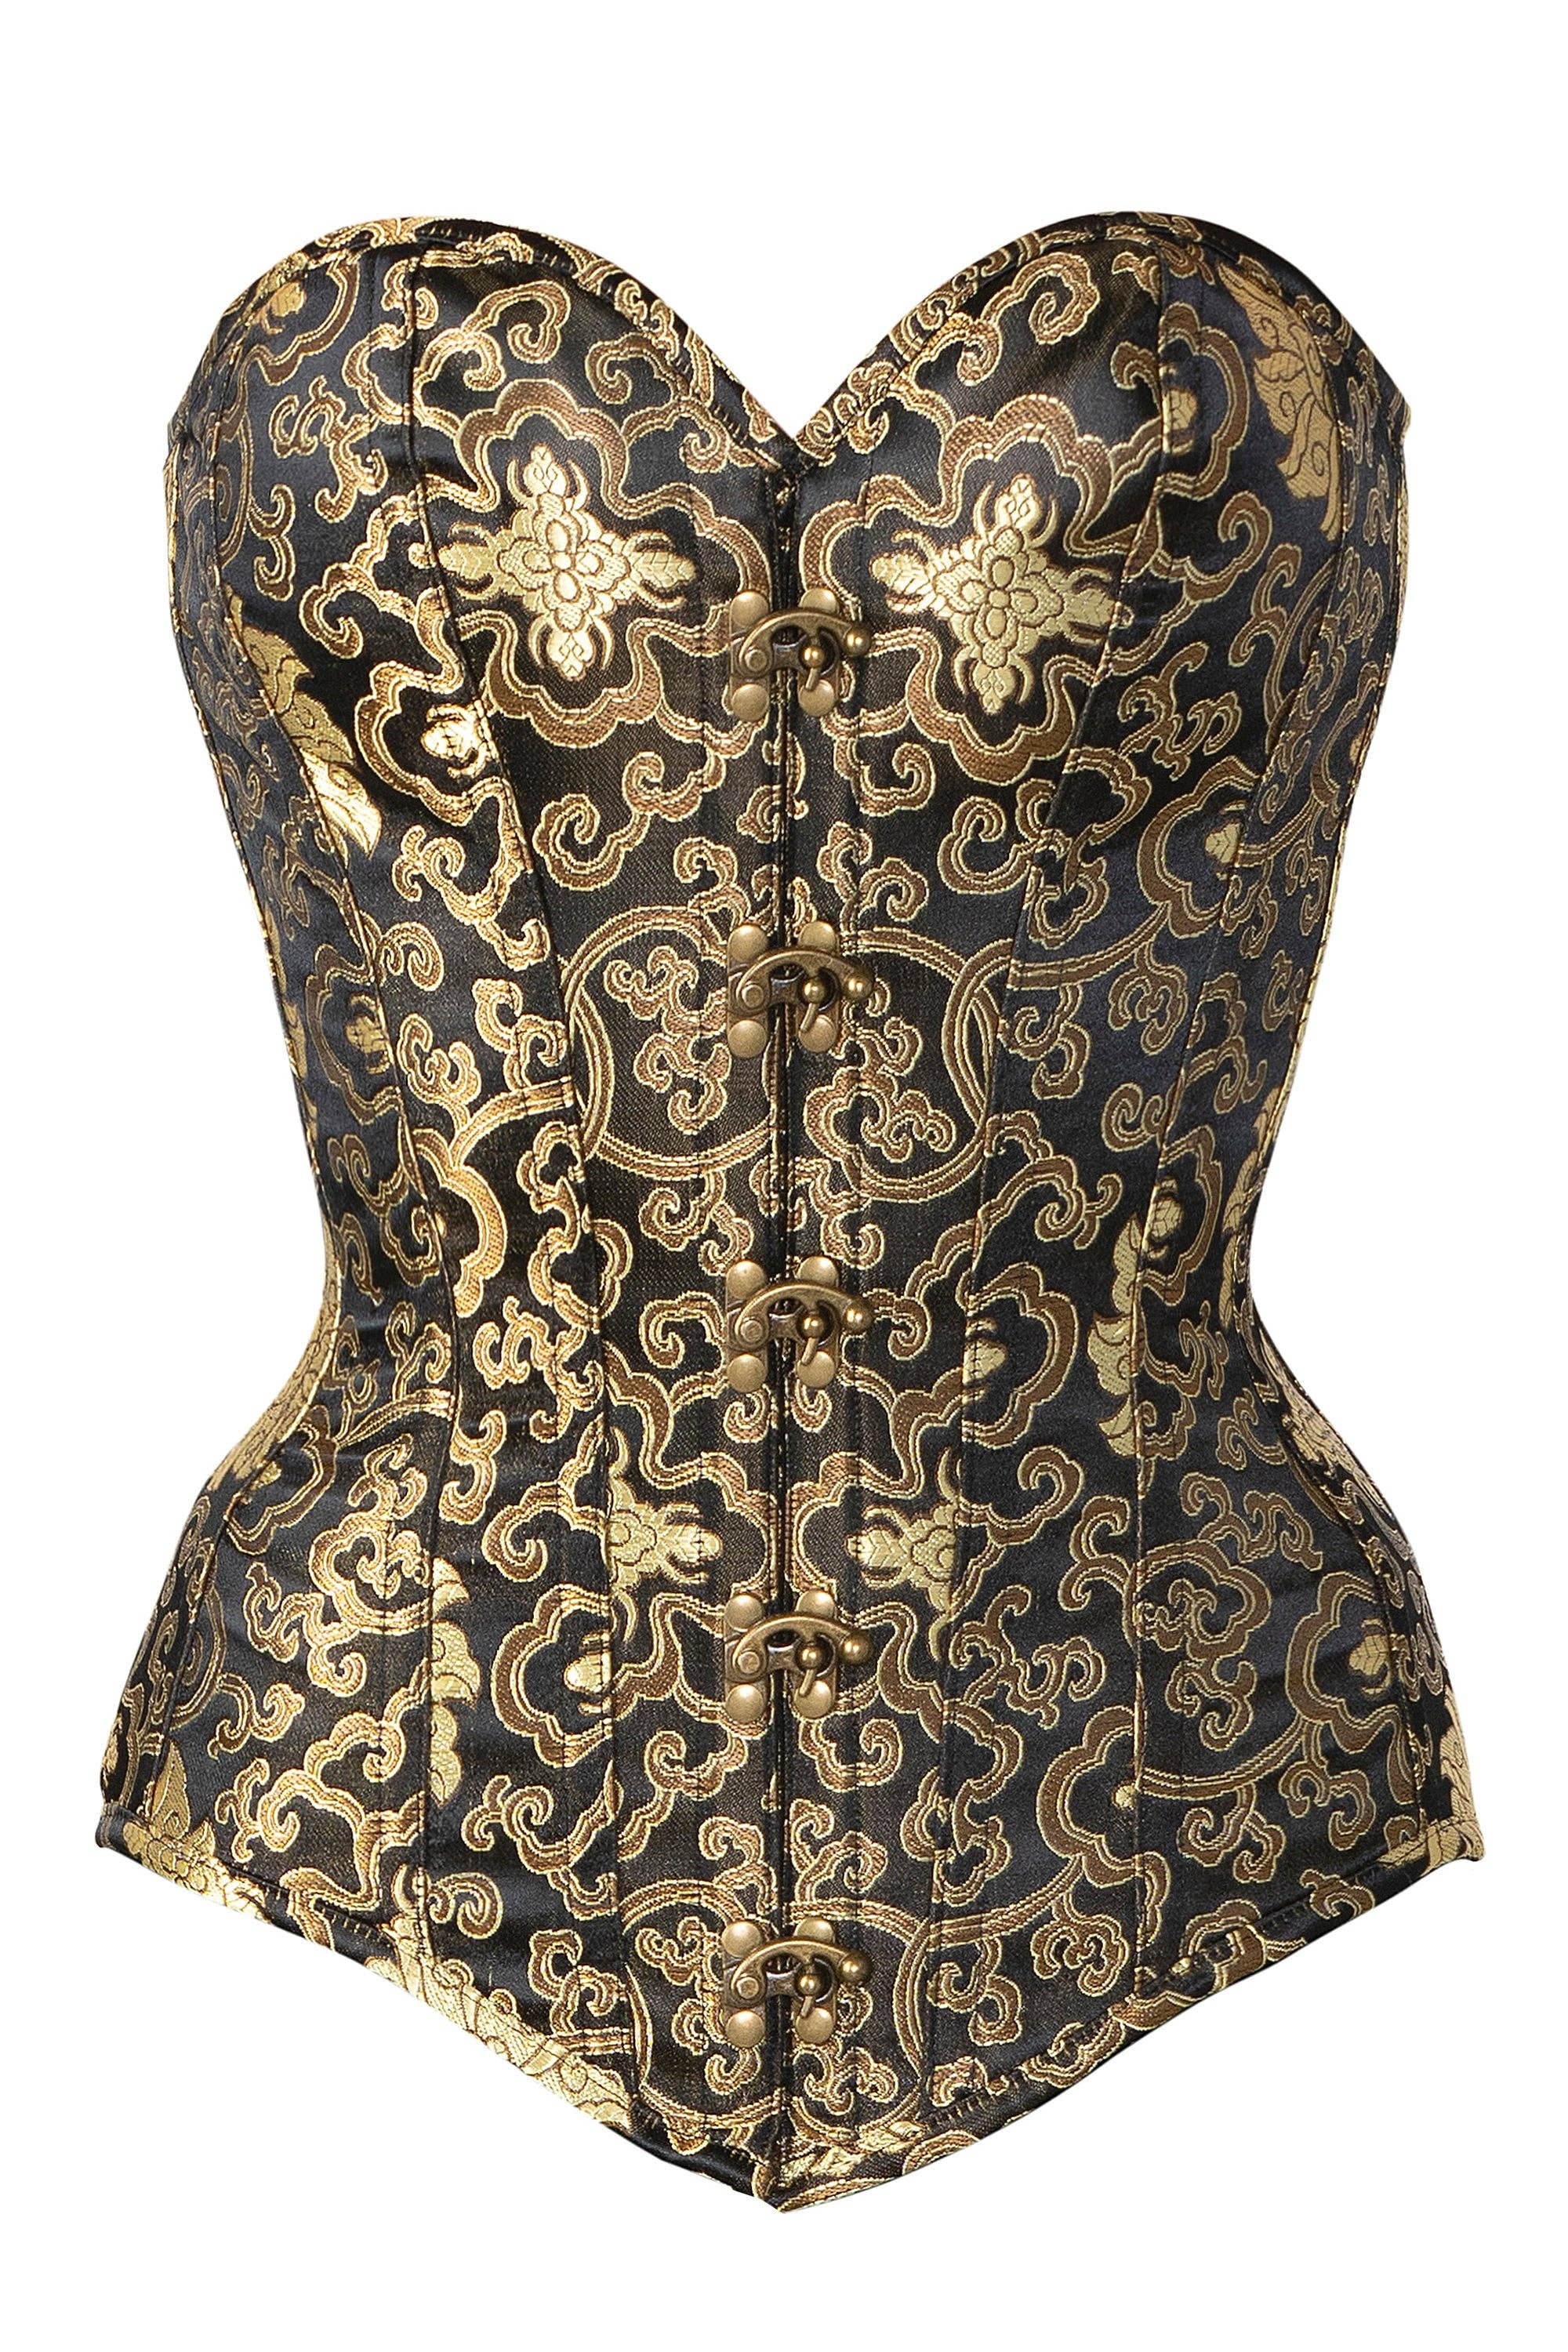 Corset Story - Black With Gold Brocade Pattern Longline Overbust With Hooks: US18